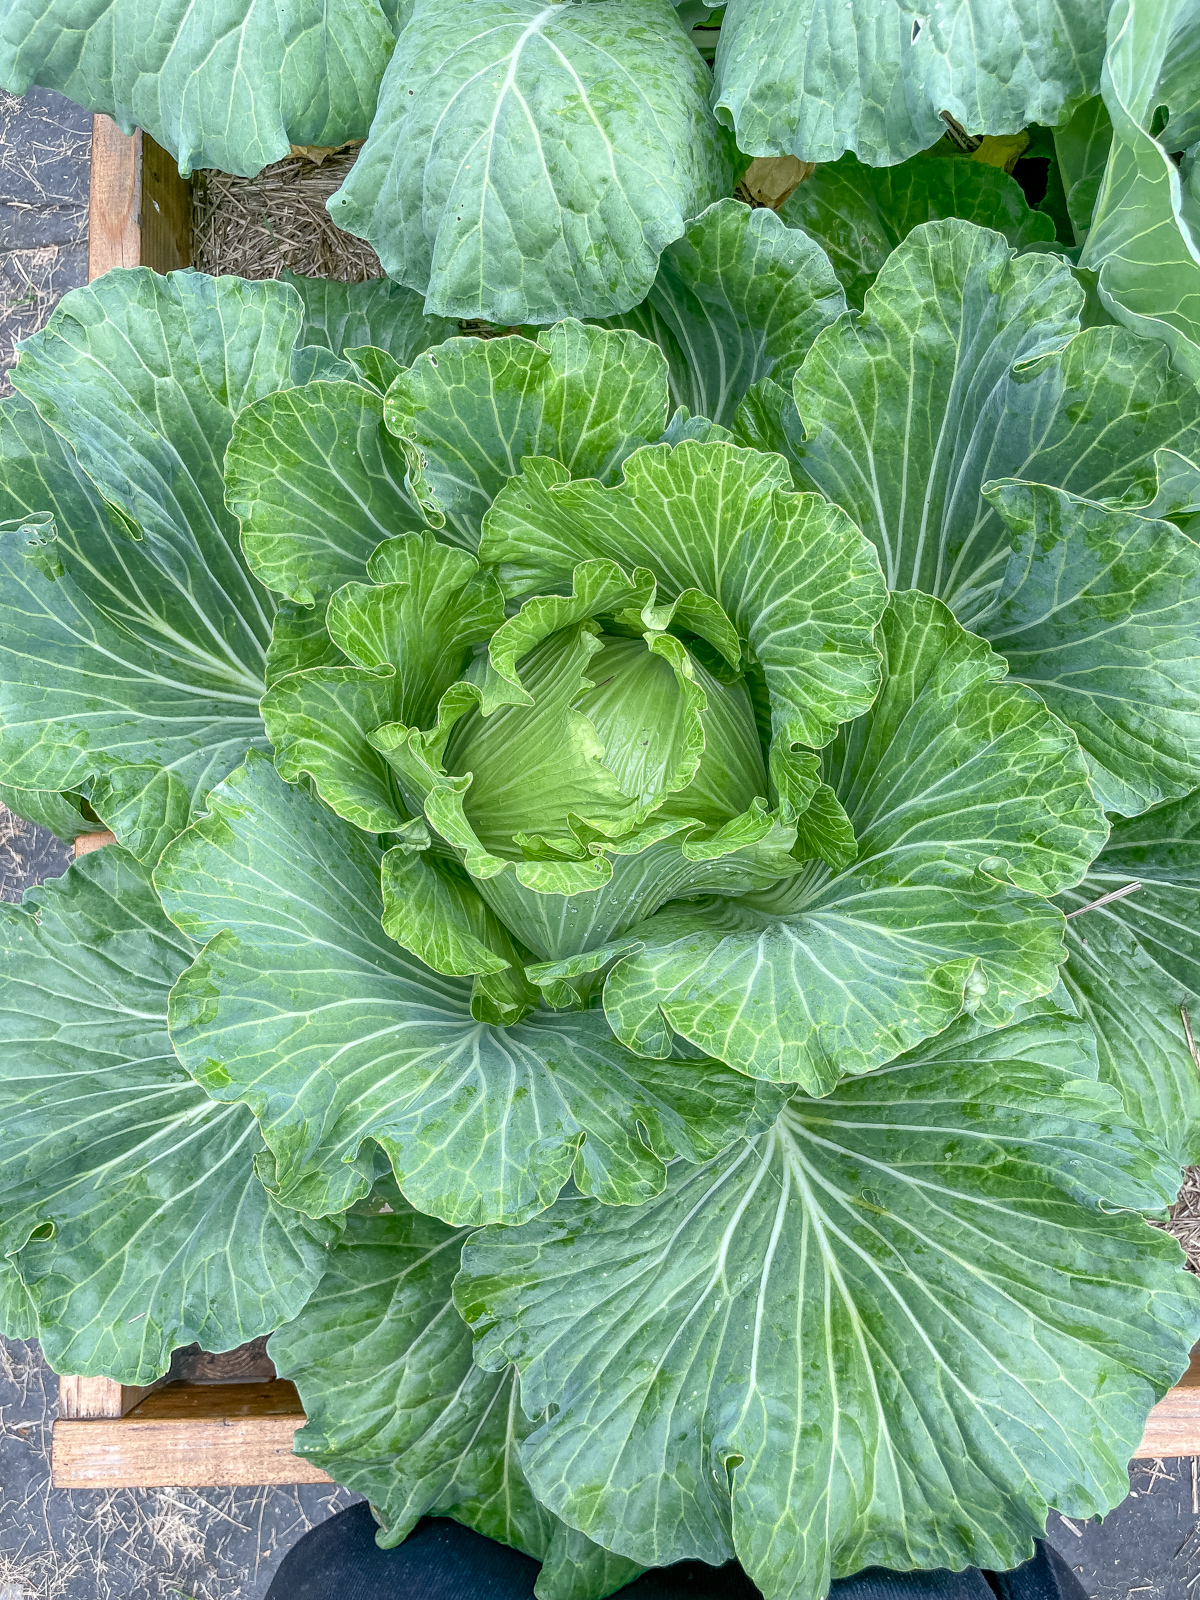 Cabbage growing in the garden